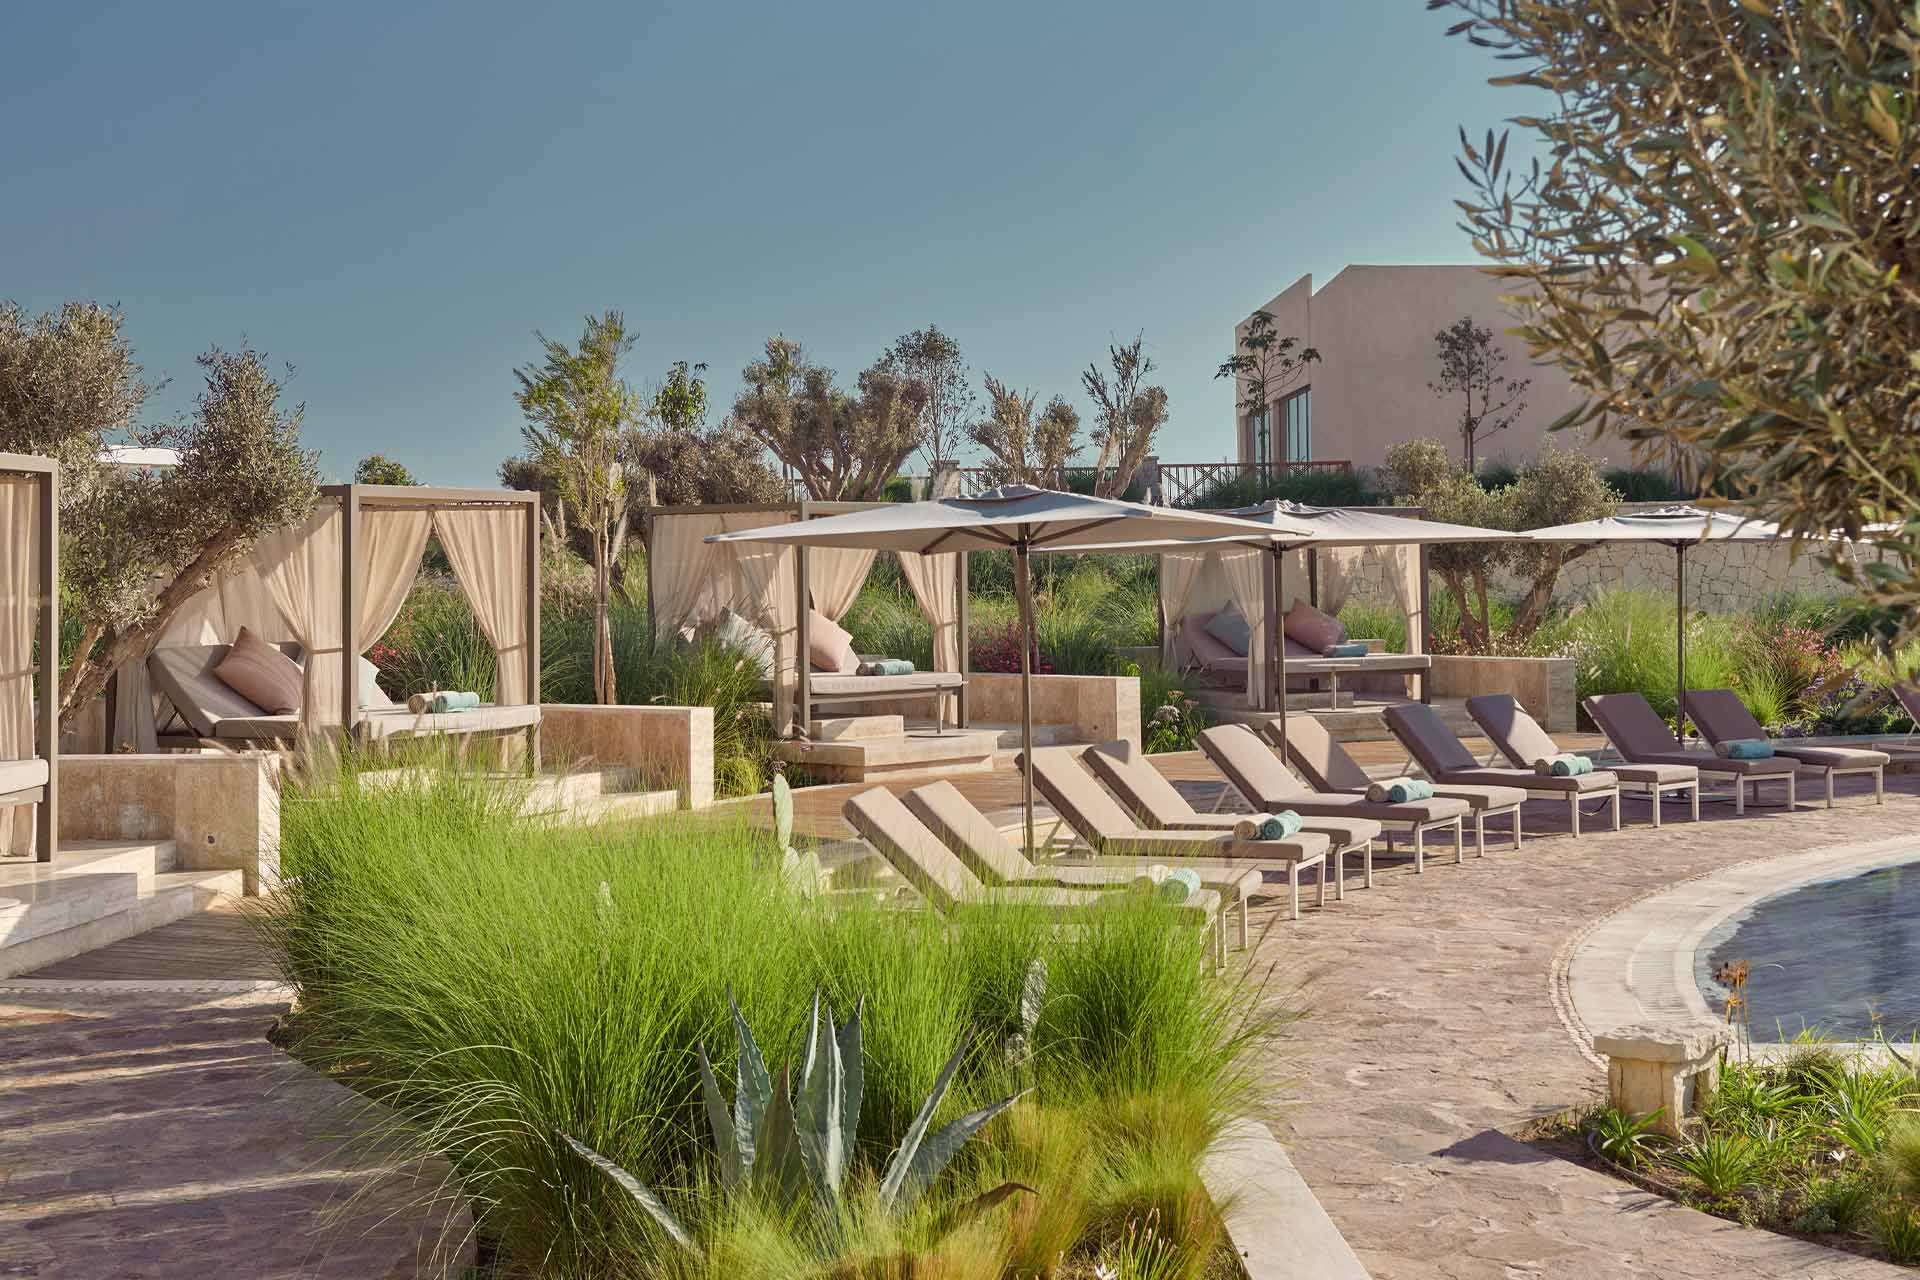 Fairmont Taghazout Bay in Morocco